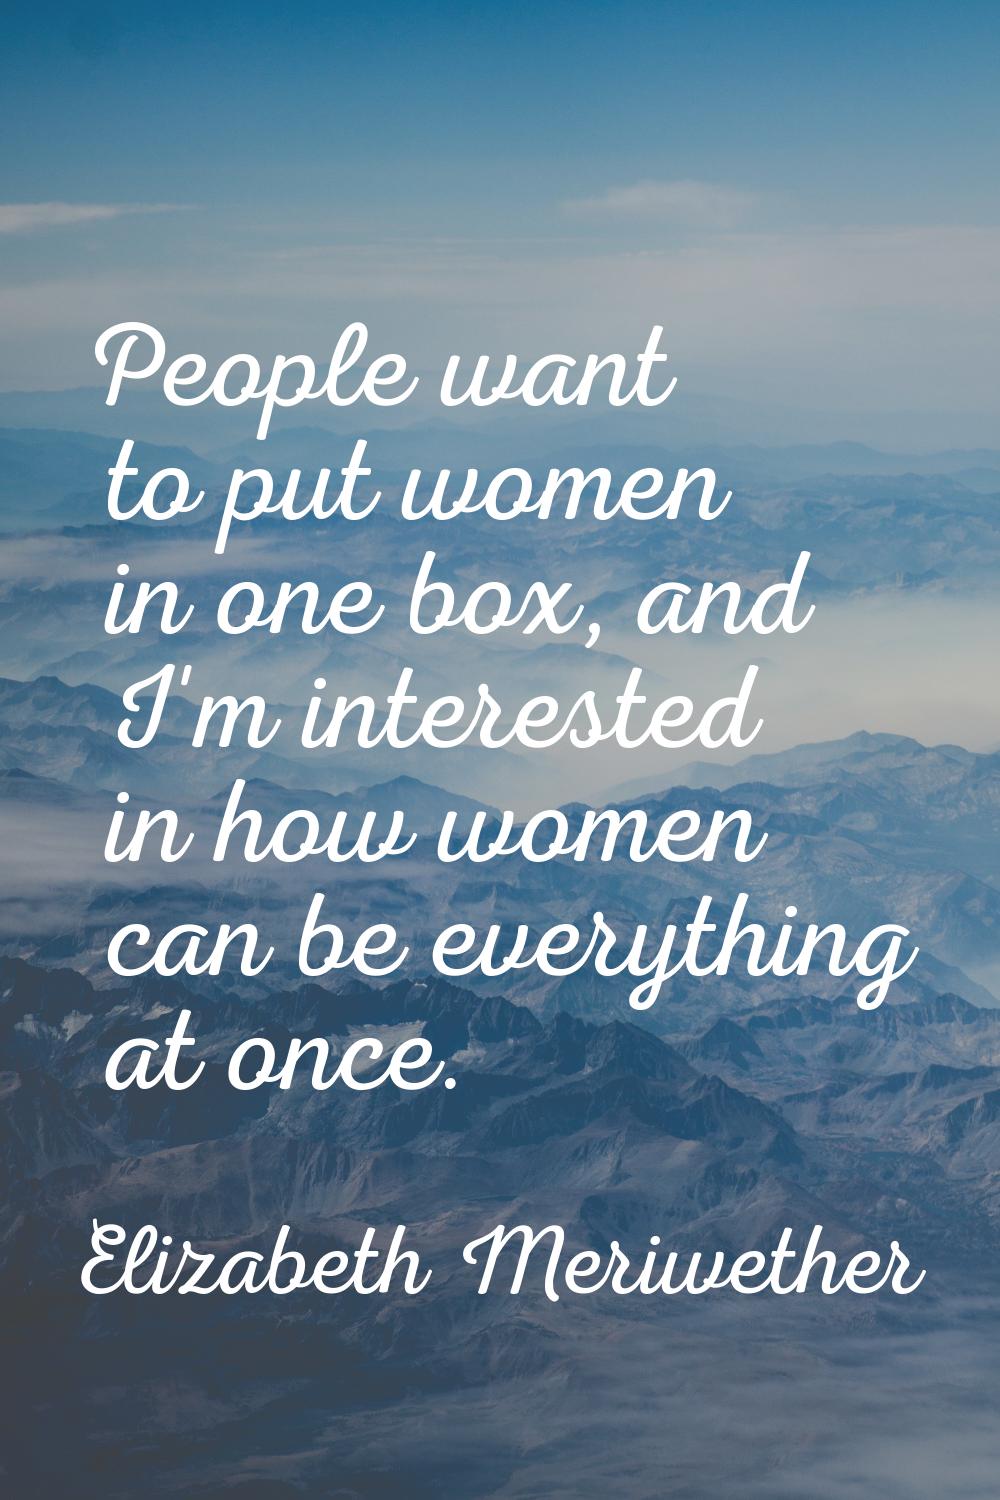 People want to put women in one box, and I'm interested in how women can be everything at once.